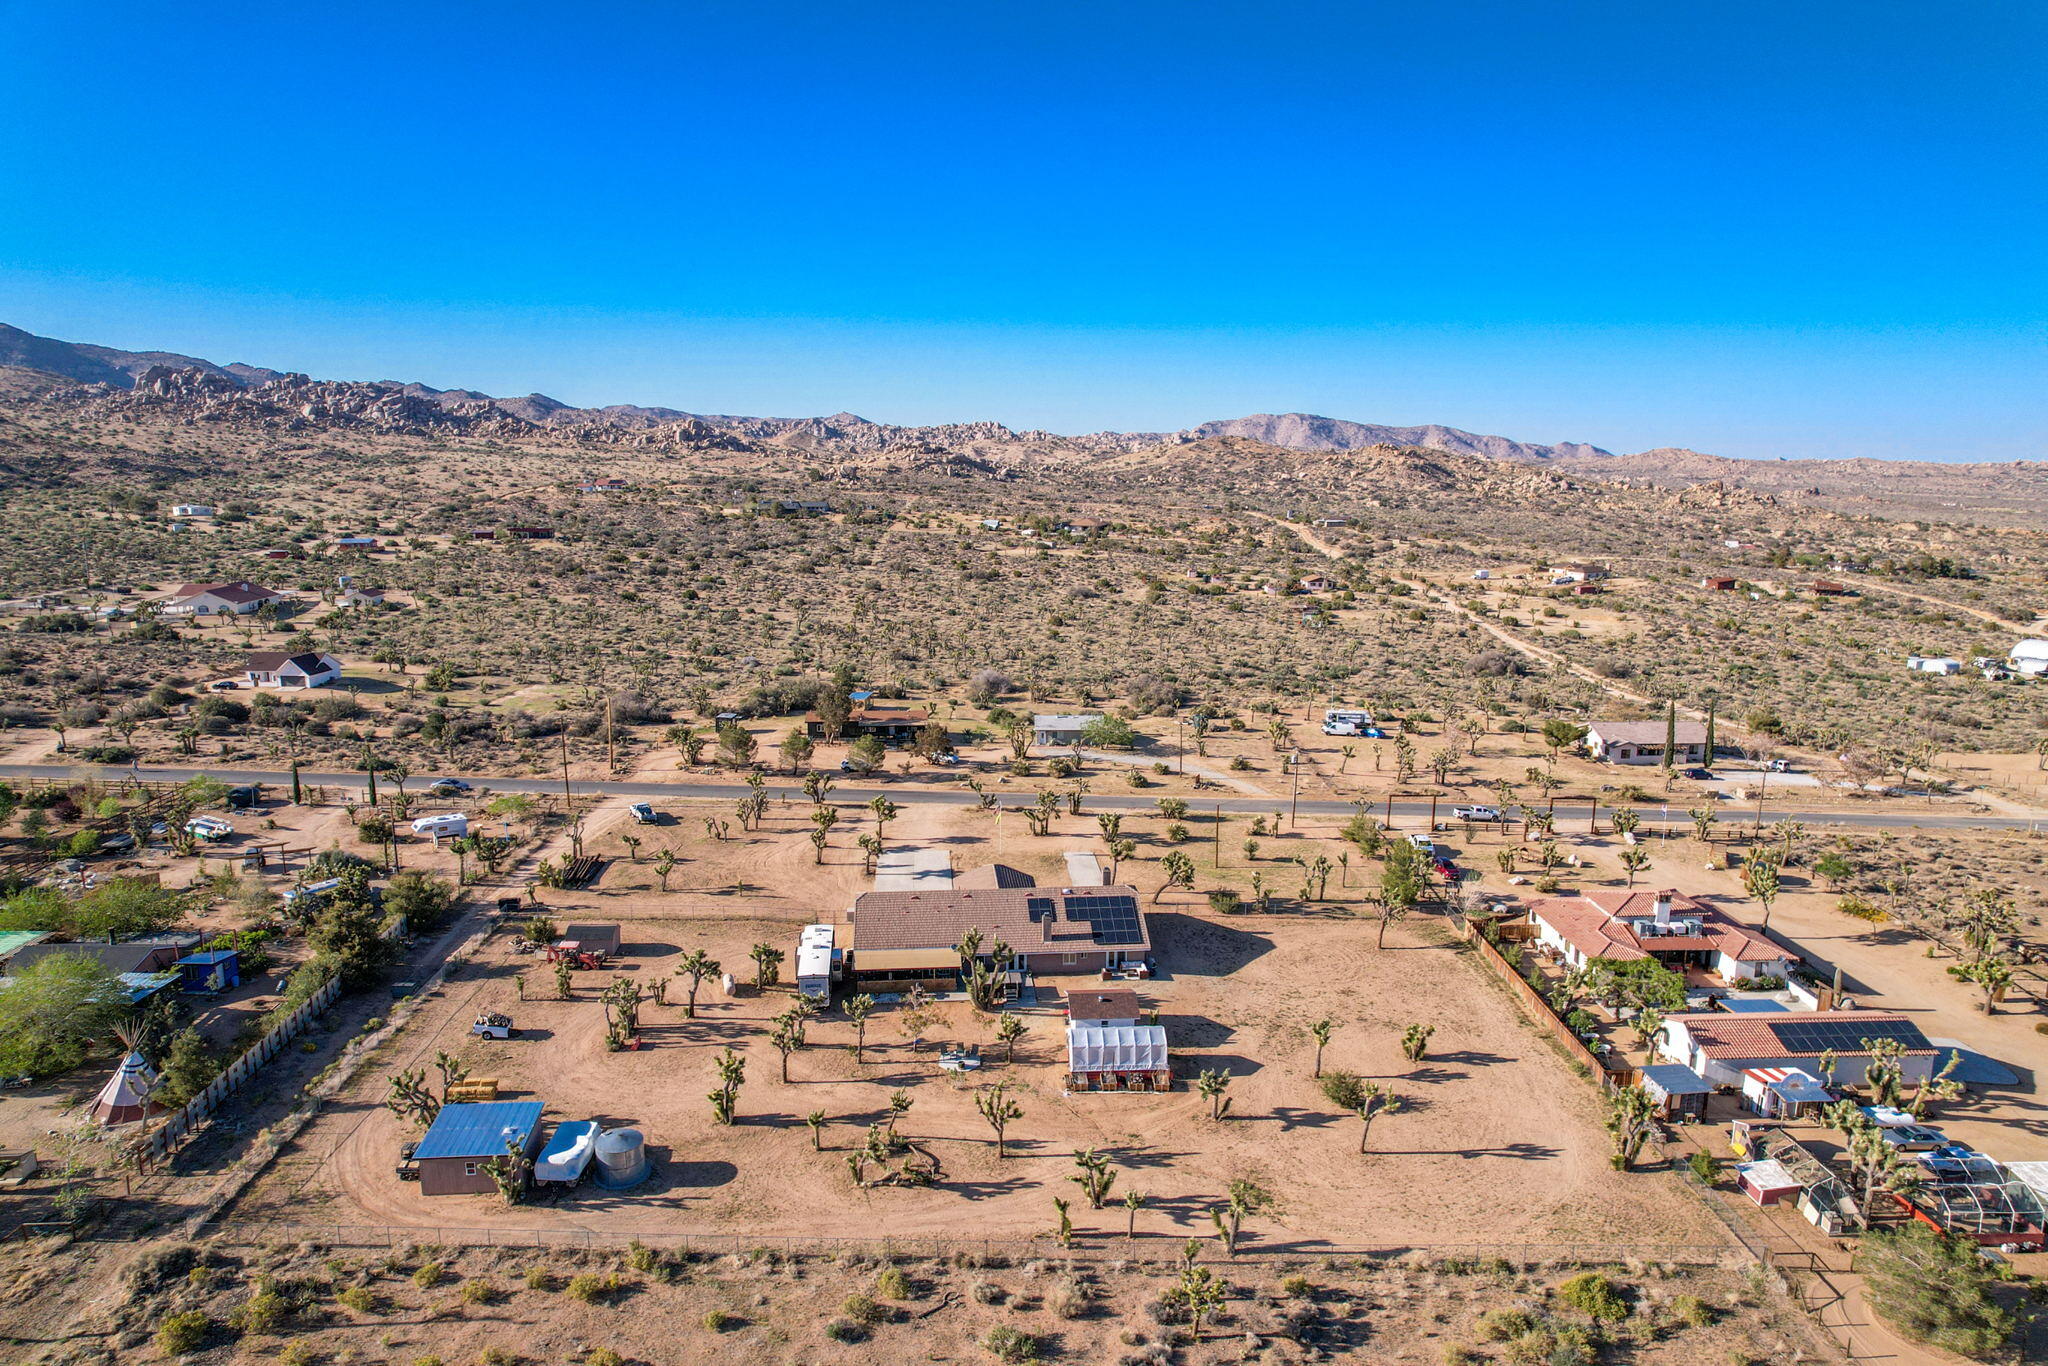 Wow!  A rare opportunity to be able to own an incredible home on 2.5 acre parcel in the world famous Pioneertown.  This custom designed home has been fully remodeled and features and open floor plan with high ceilings, paid off solar with a Tesla battery back up wall, new pressure tank for the well, ceiling fans and LED lighting throughout, new whole home evaporative cooler, GE Profile stainless steel appliances, new carpet in the guest rooms, tons of storage throughout the home, 2 automatic doggie doors with security locks, a large greenhouse and swim spa in the backyard along with 3 storage buildings one of which could easily be used as a guest room or playhouse.  Backyard if fully fenced.  This home is located just a few miles from the Famous Pappy and Harriets, a few houses down from the Rimrock Ranch and 28 miles from Big Bear the off road way.  This is a perfect place for anyone looking for a private getaway, primary home or income producing short term rental. Call today for your private showing.